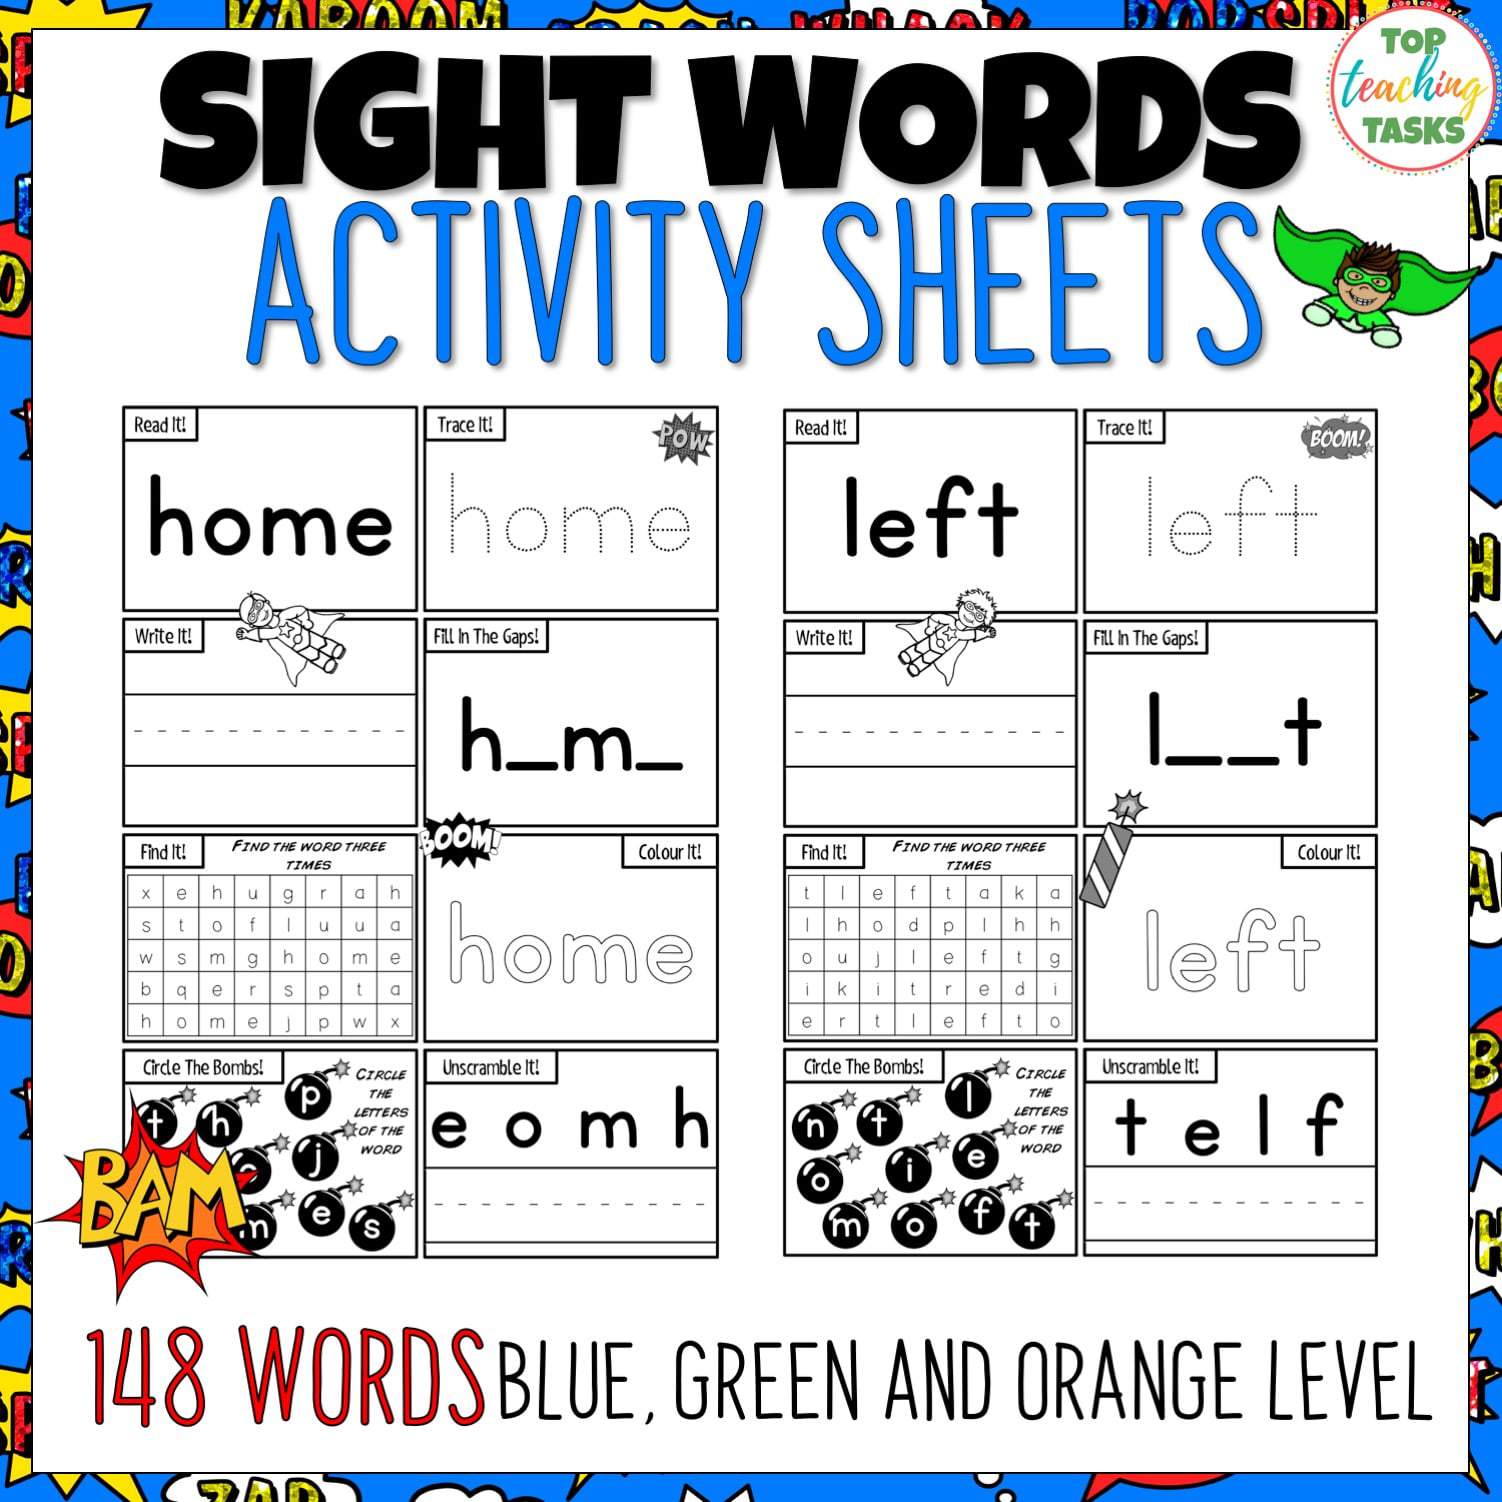 sight-words-activity-worksheets-volume-two-top-teaching-tasks